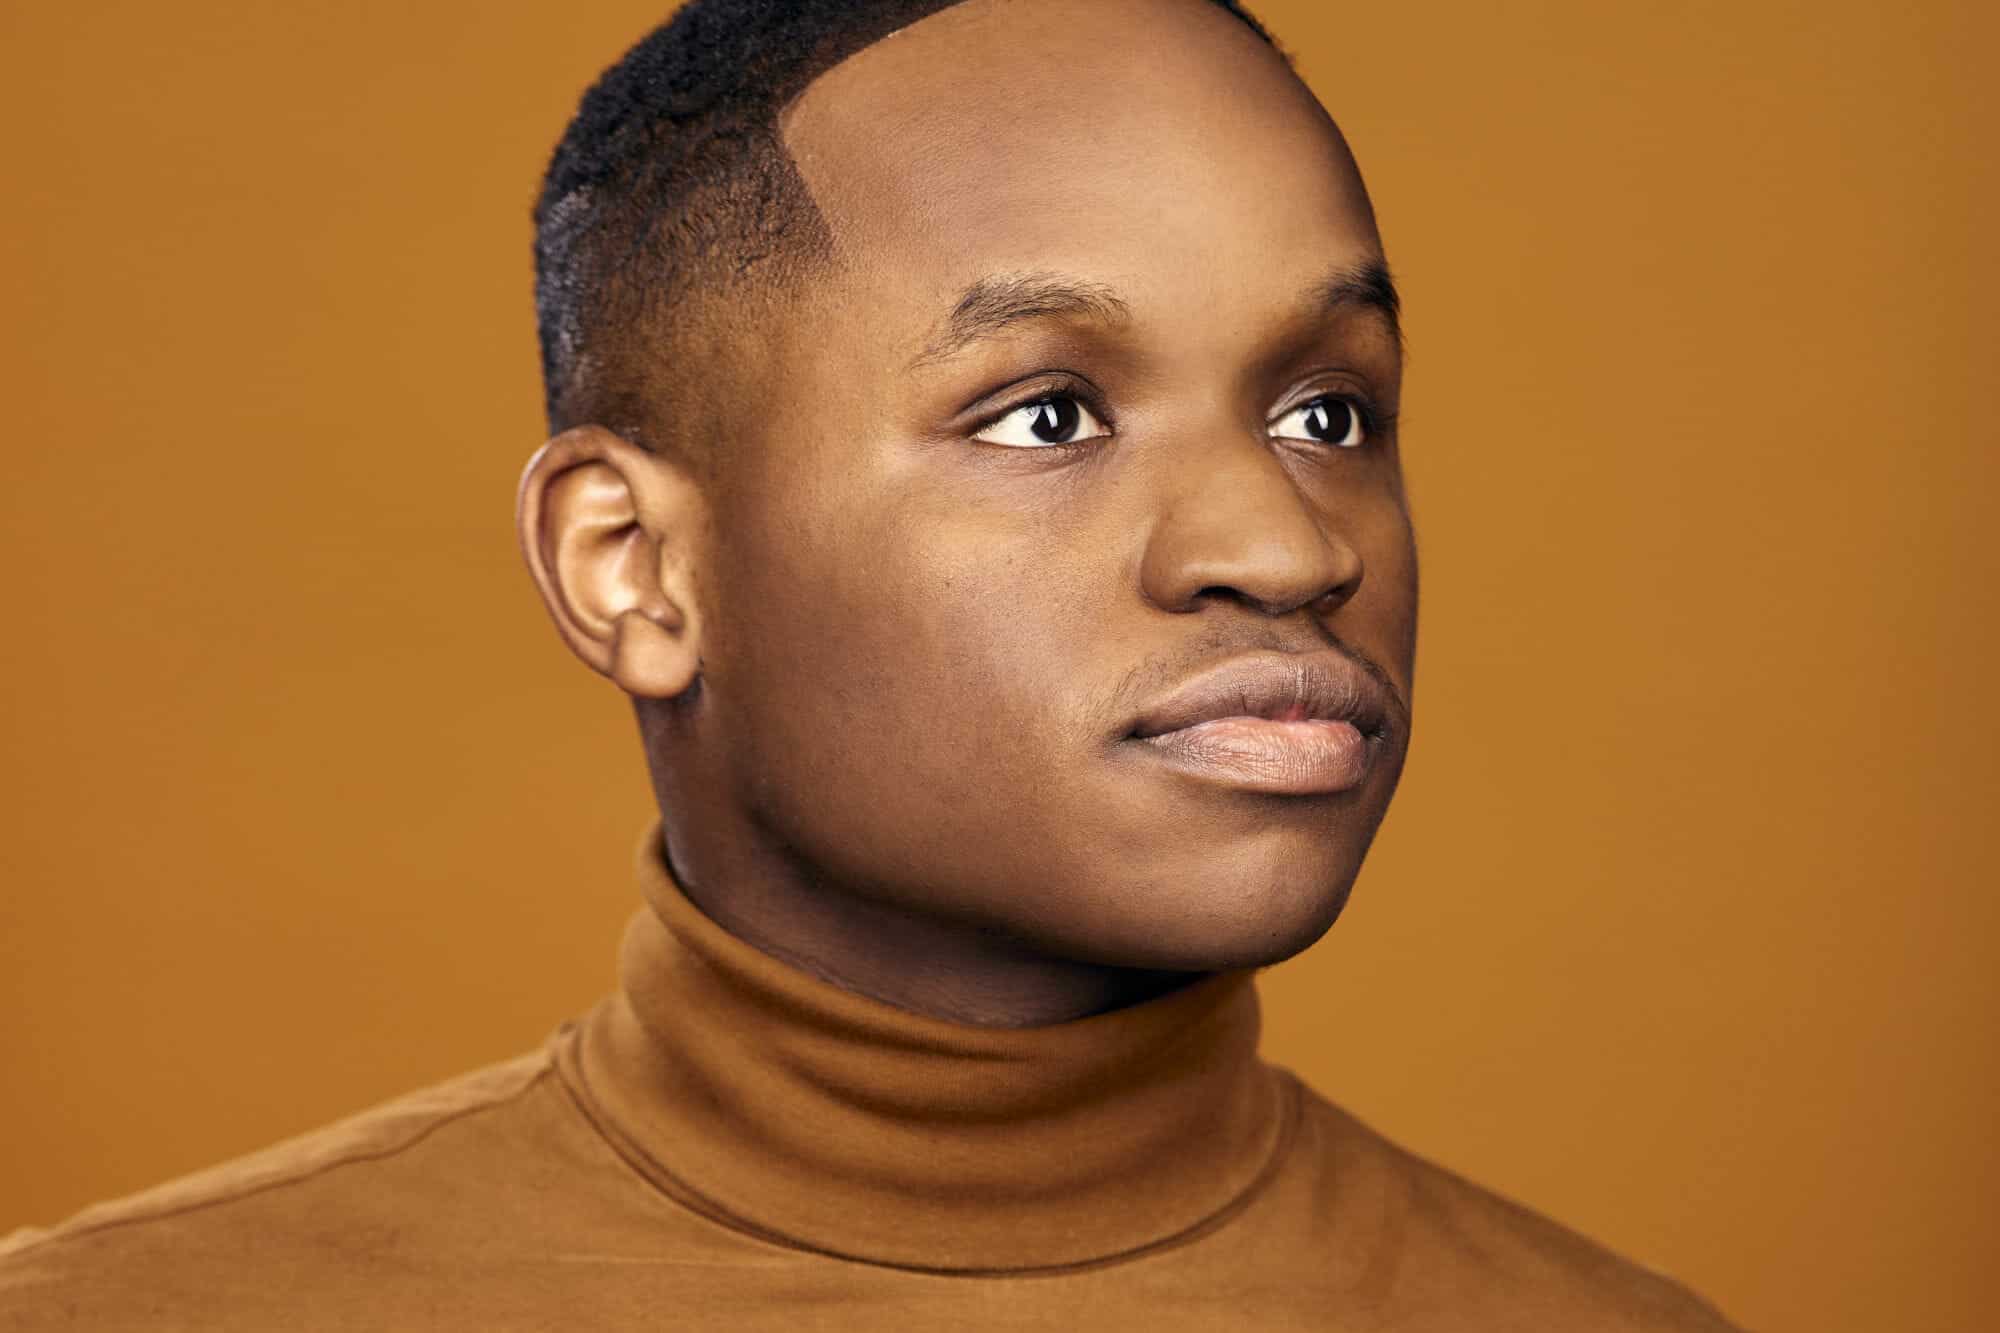 NYC Dancer Joshua Dawson's headshot. He's wearing a brown cowl neck stood against a brown background